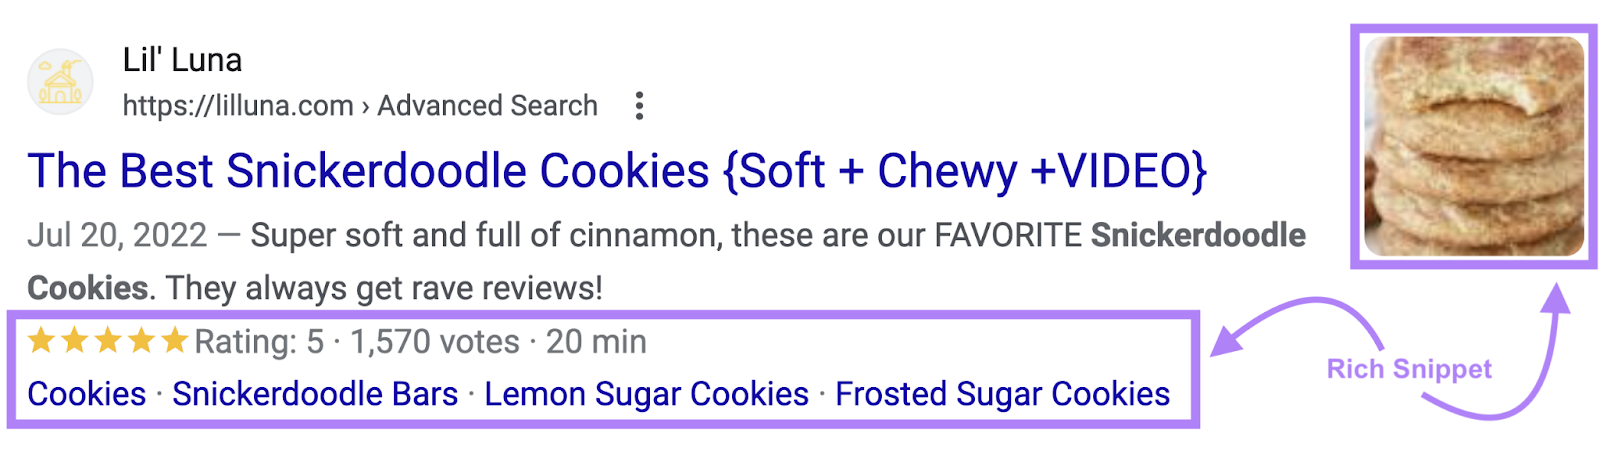 A rich snippet result on Google SERP